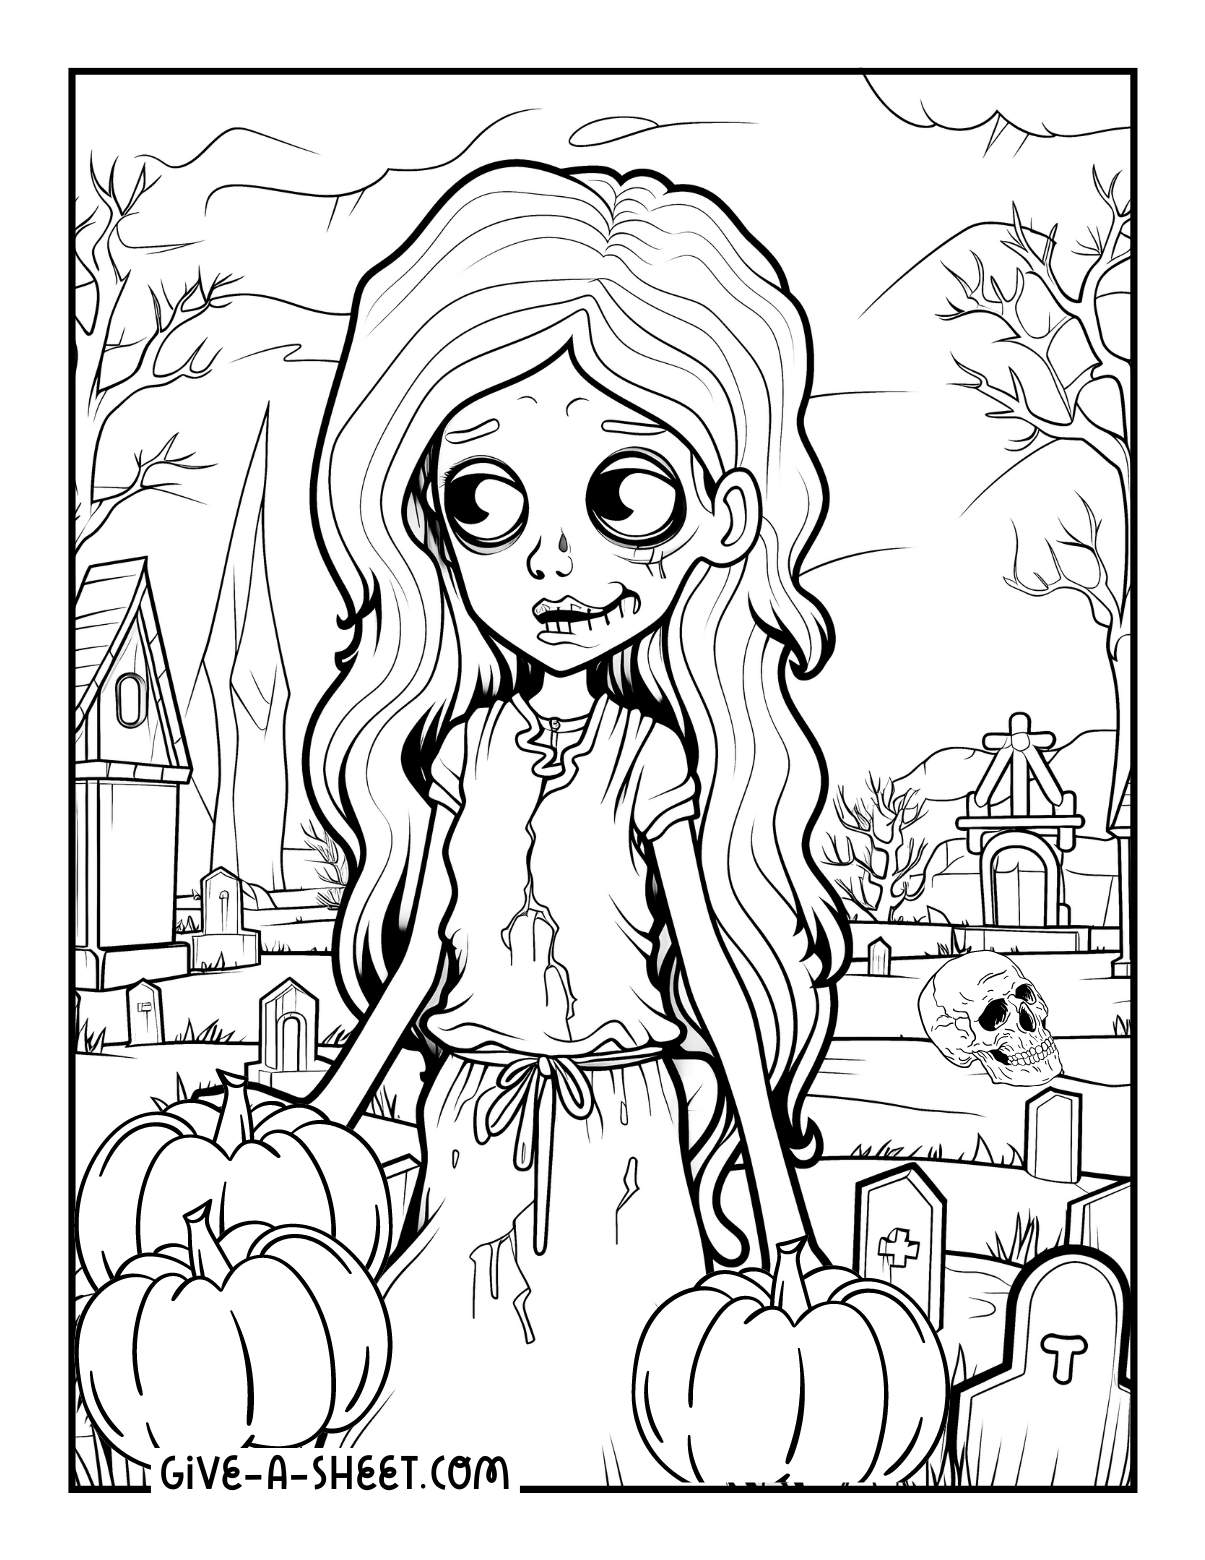 Halloween zombie bride beside corpses grave coloring page.